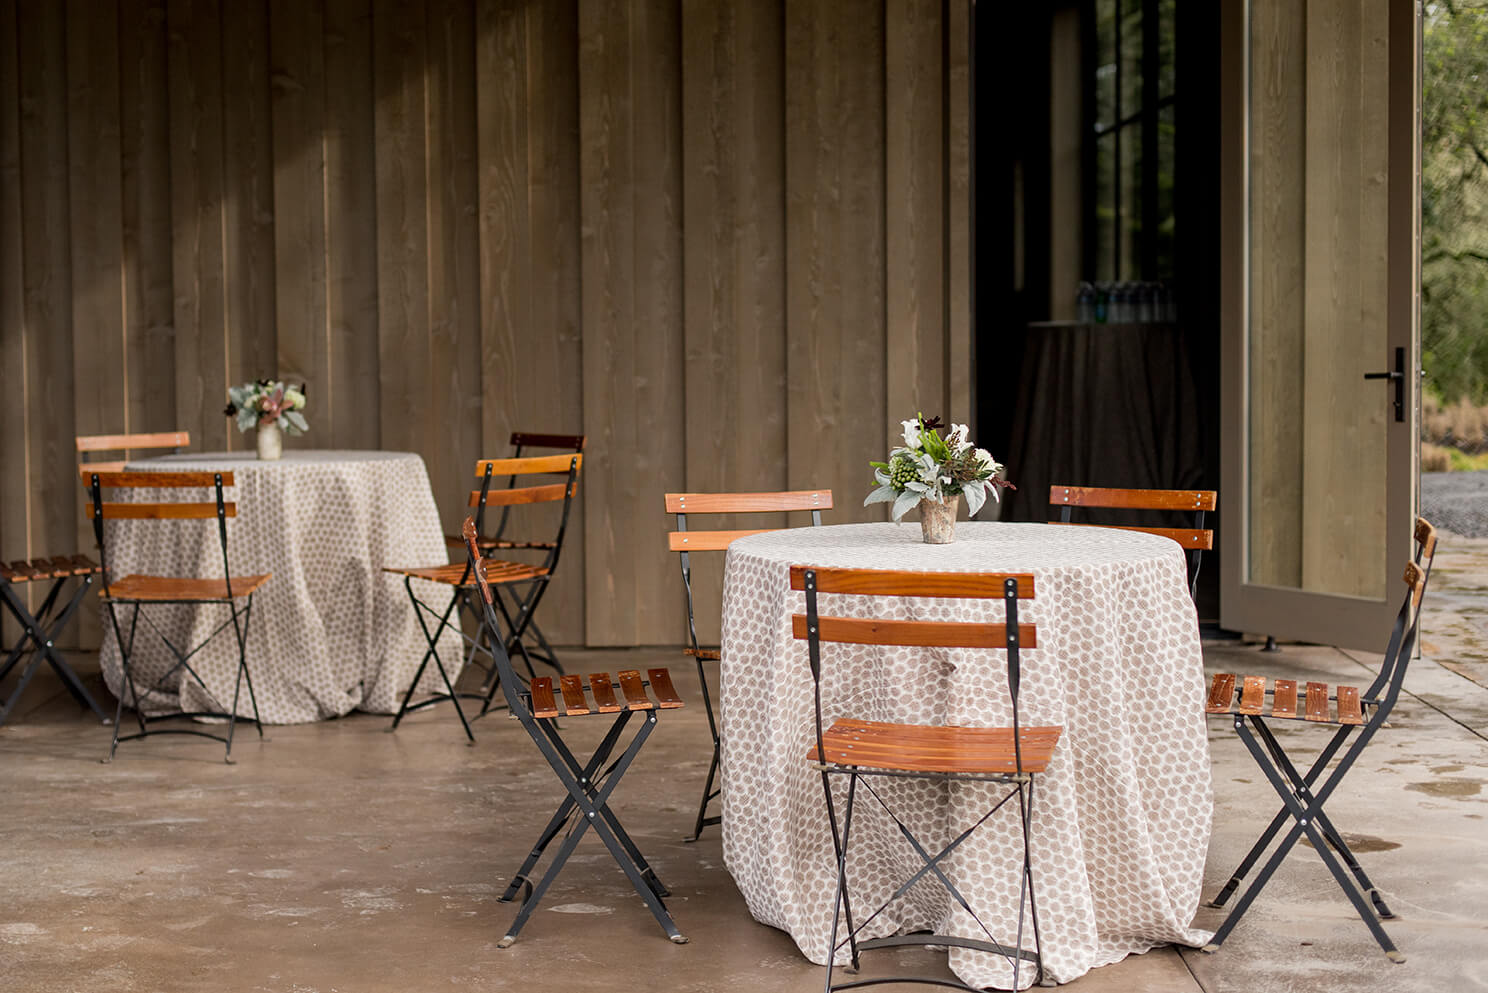 Two round tables with rustic floral centerpieces in front of wooden building at Sonoma county winery